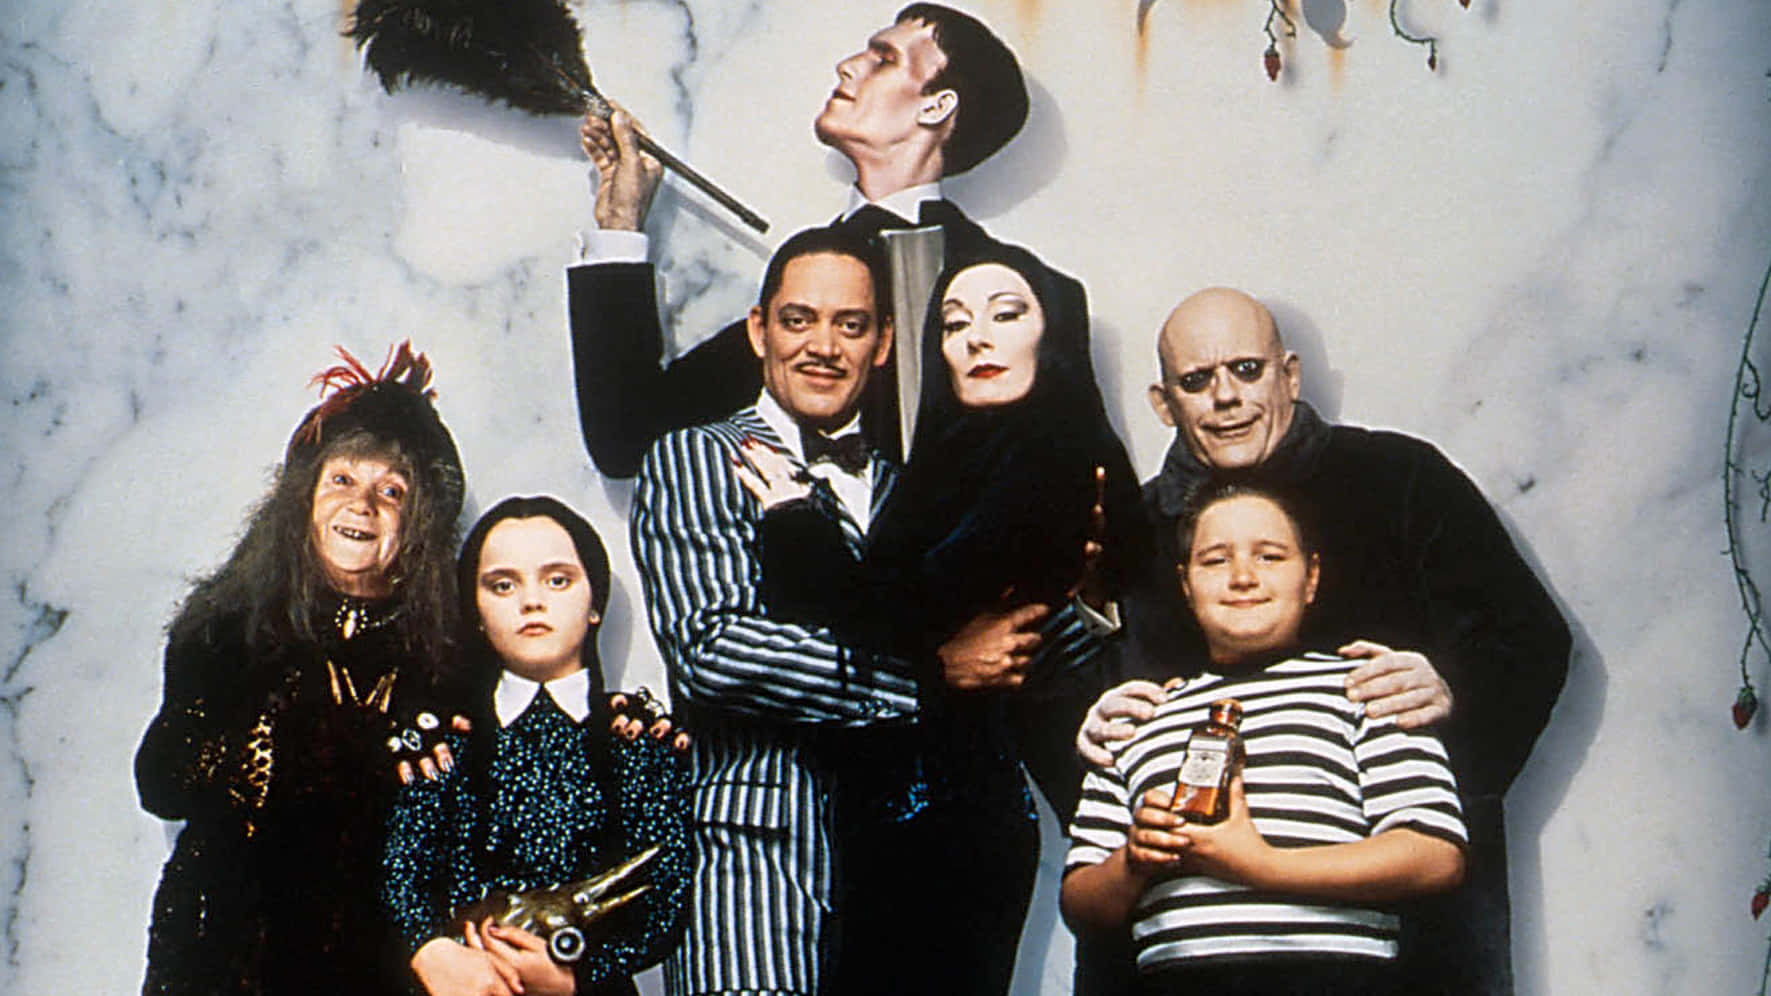 Bringing back the classic and iconic Addams Family